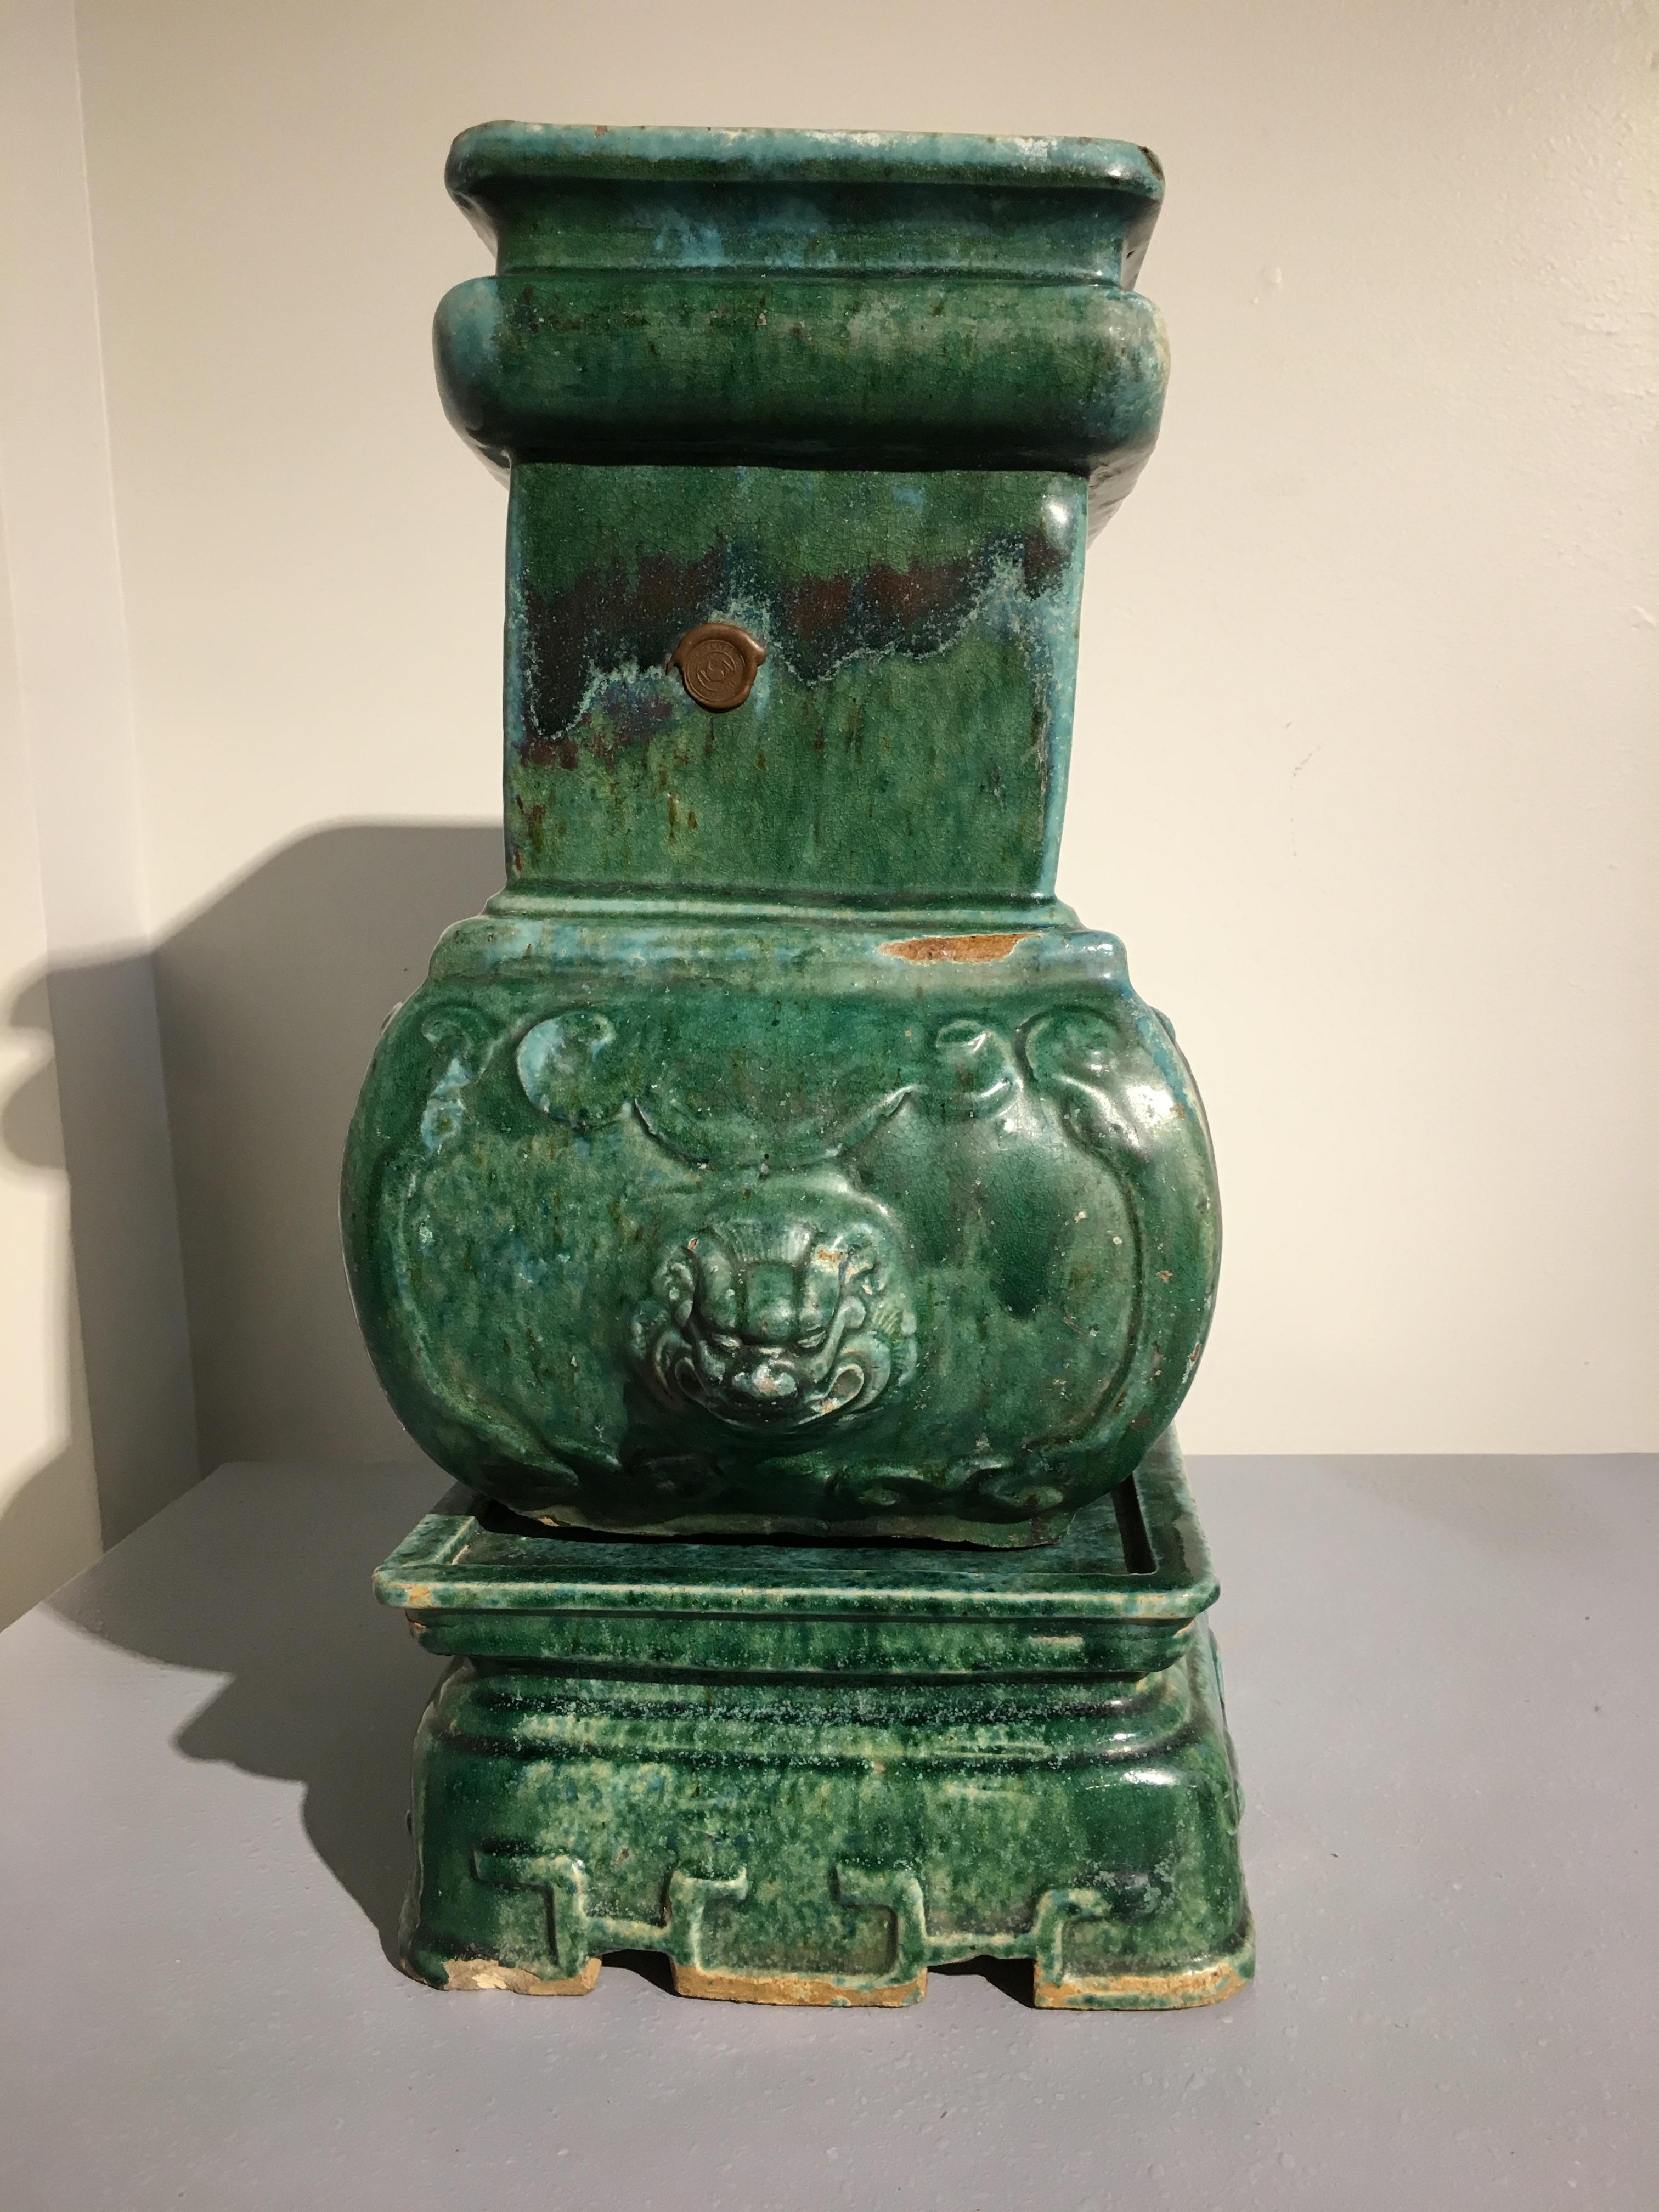 A gorgeous green glazed large Chinese pottery censer of Archaistic shape called a fanghu, set on a separate stand, Qing dynasty, second year of Tongzhi, 1863.

The censer or incense burner crafted in two parts and covered in a thick, runny and